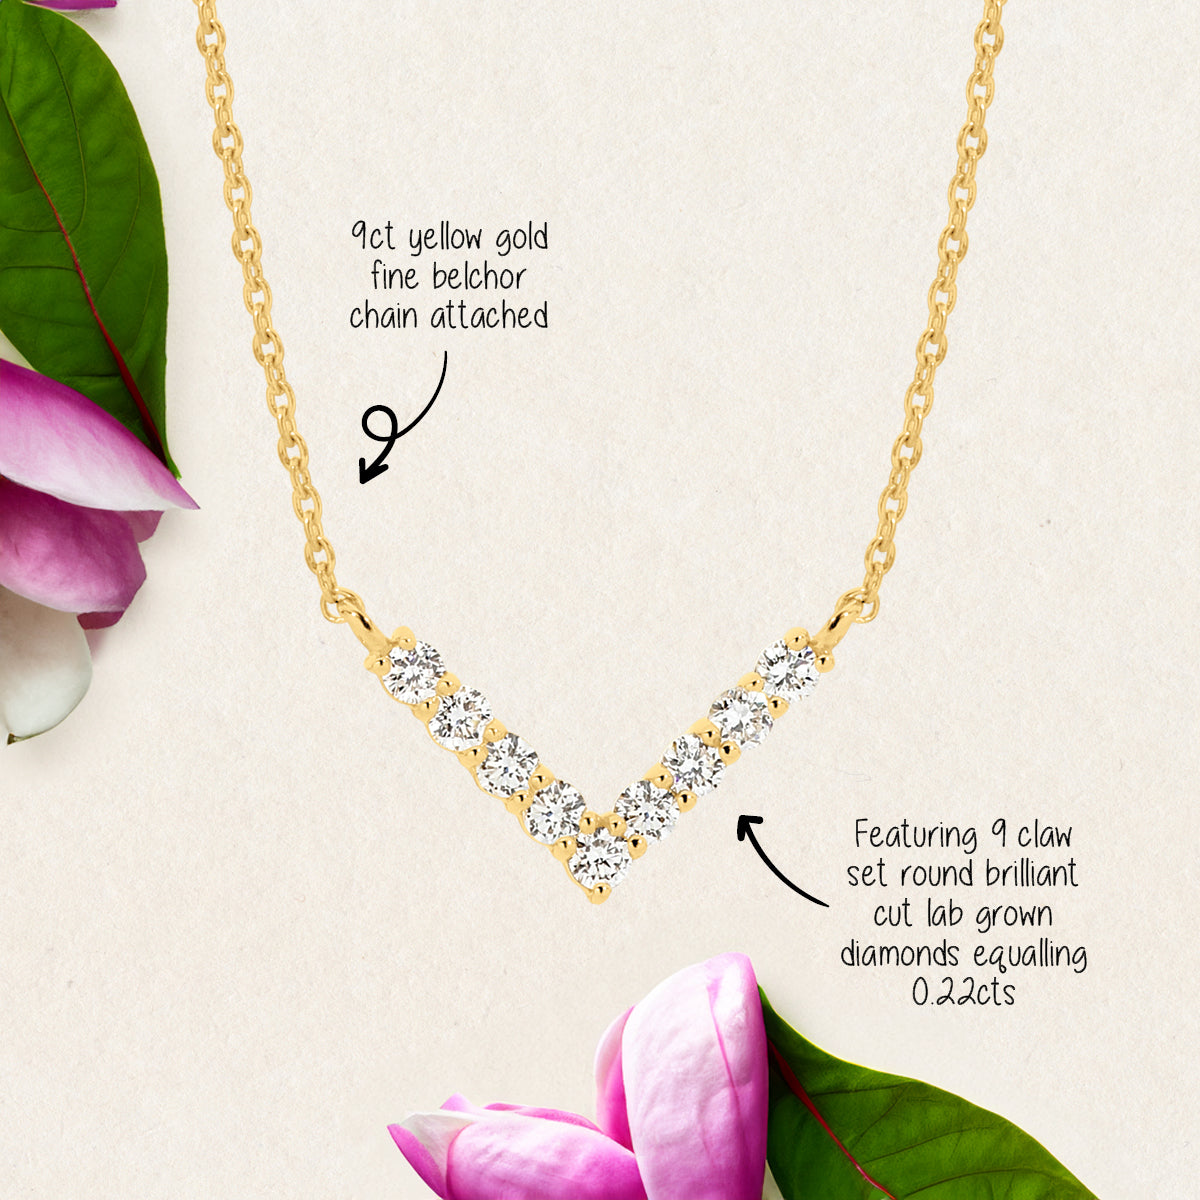 Featuring 0.22ct round cut lab grown diamond V Necklace by greenhouse diamonds